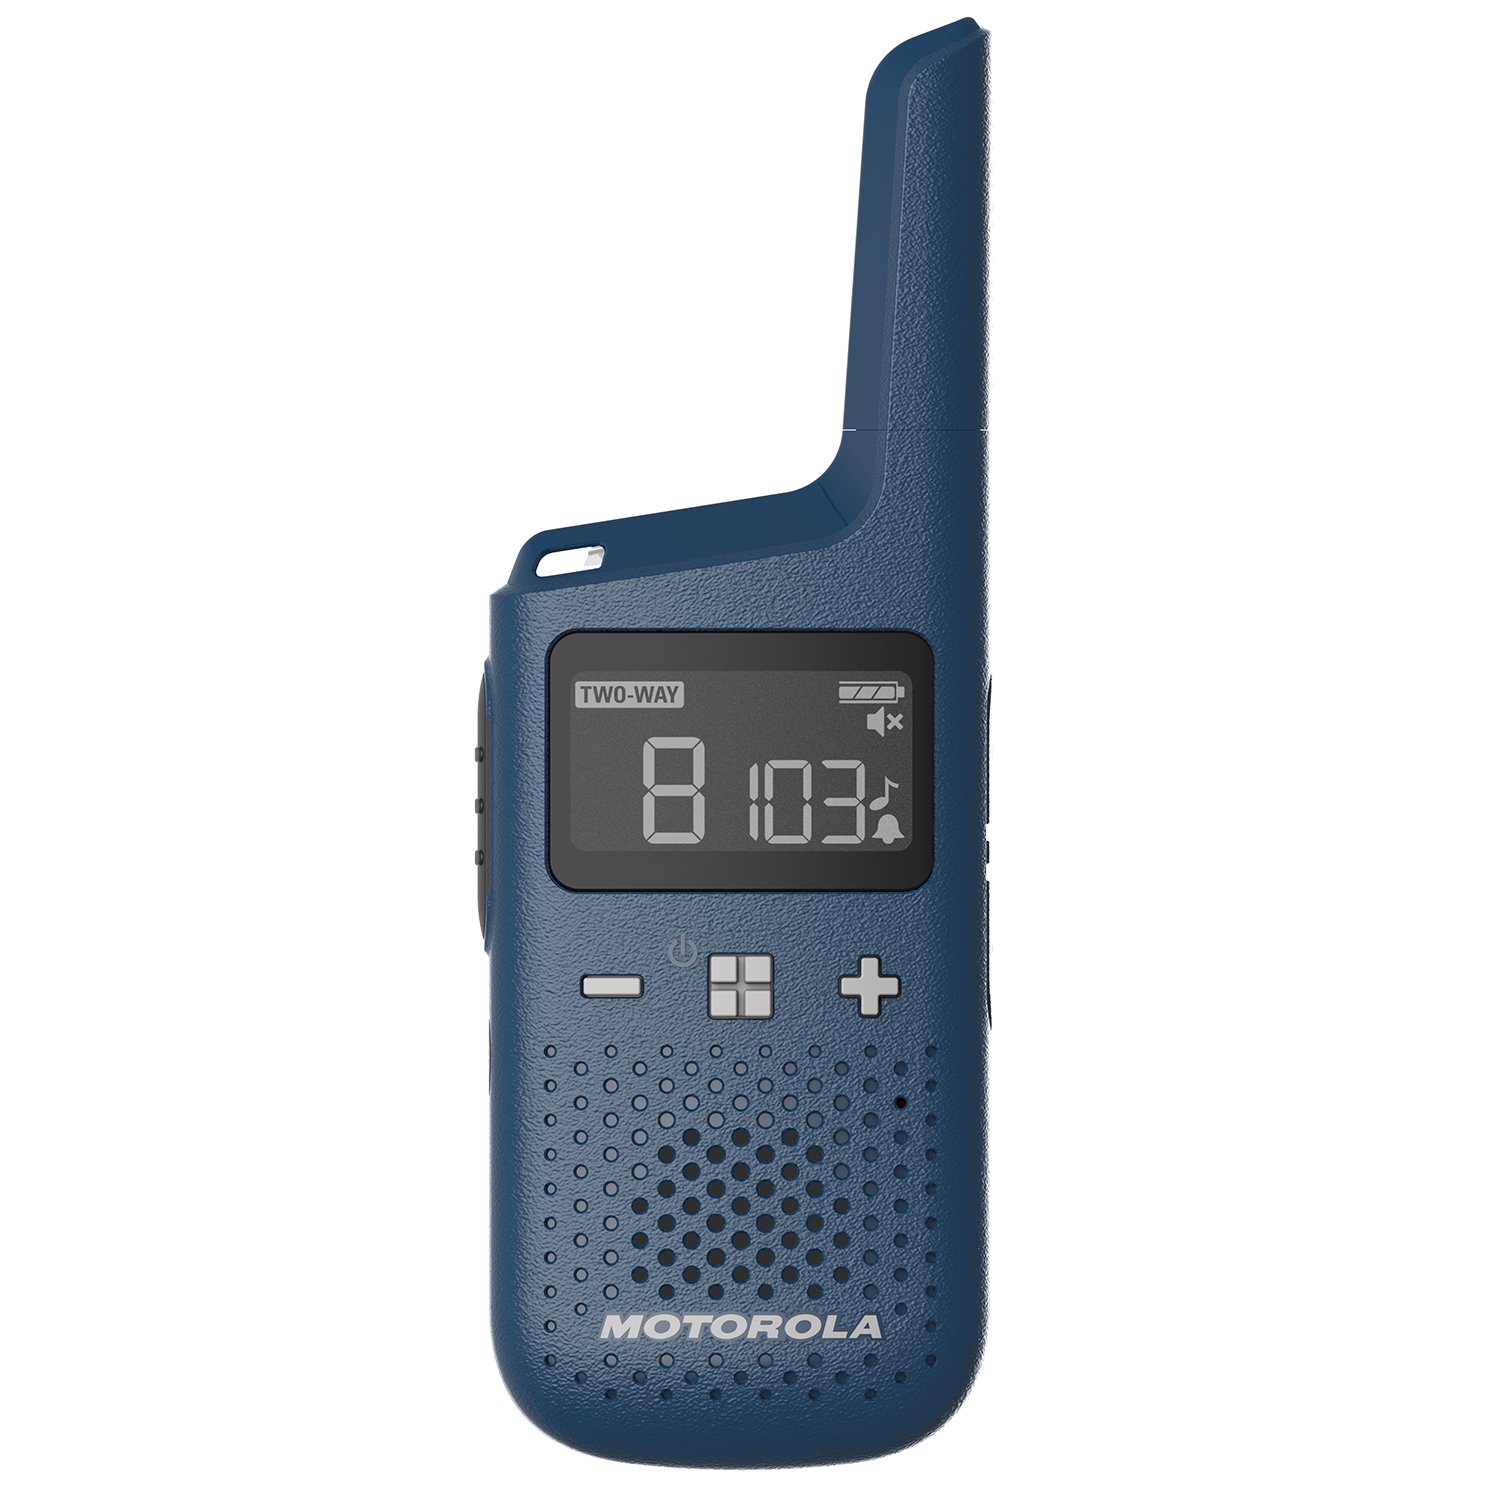 t383 (blue) walkie talkie front angle with screen on 